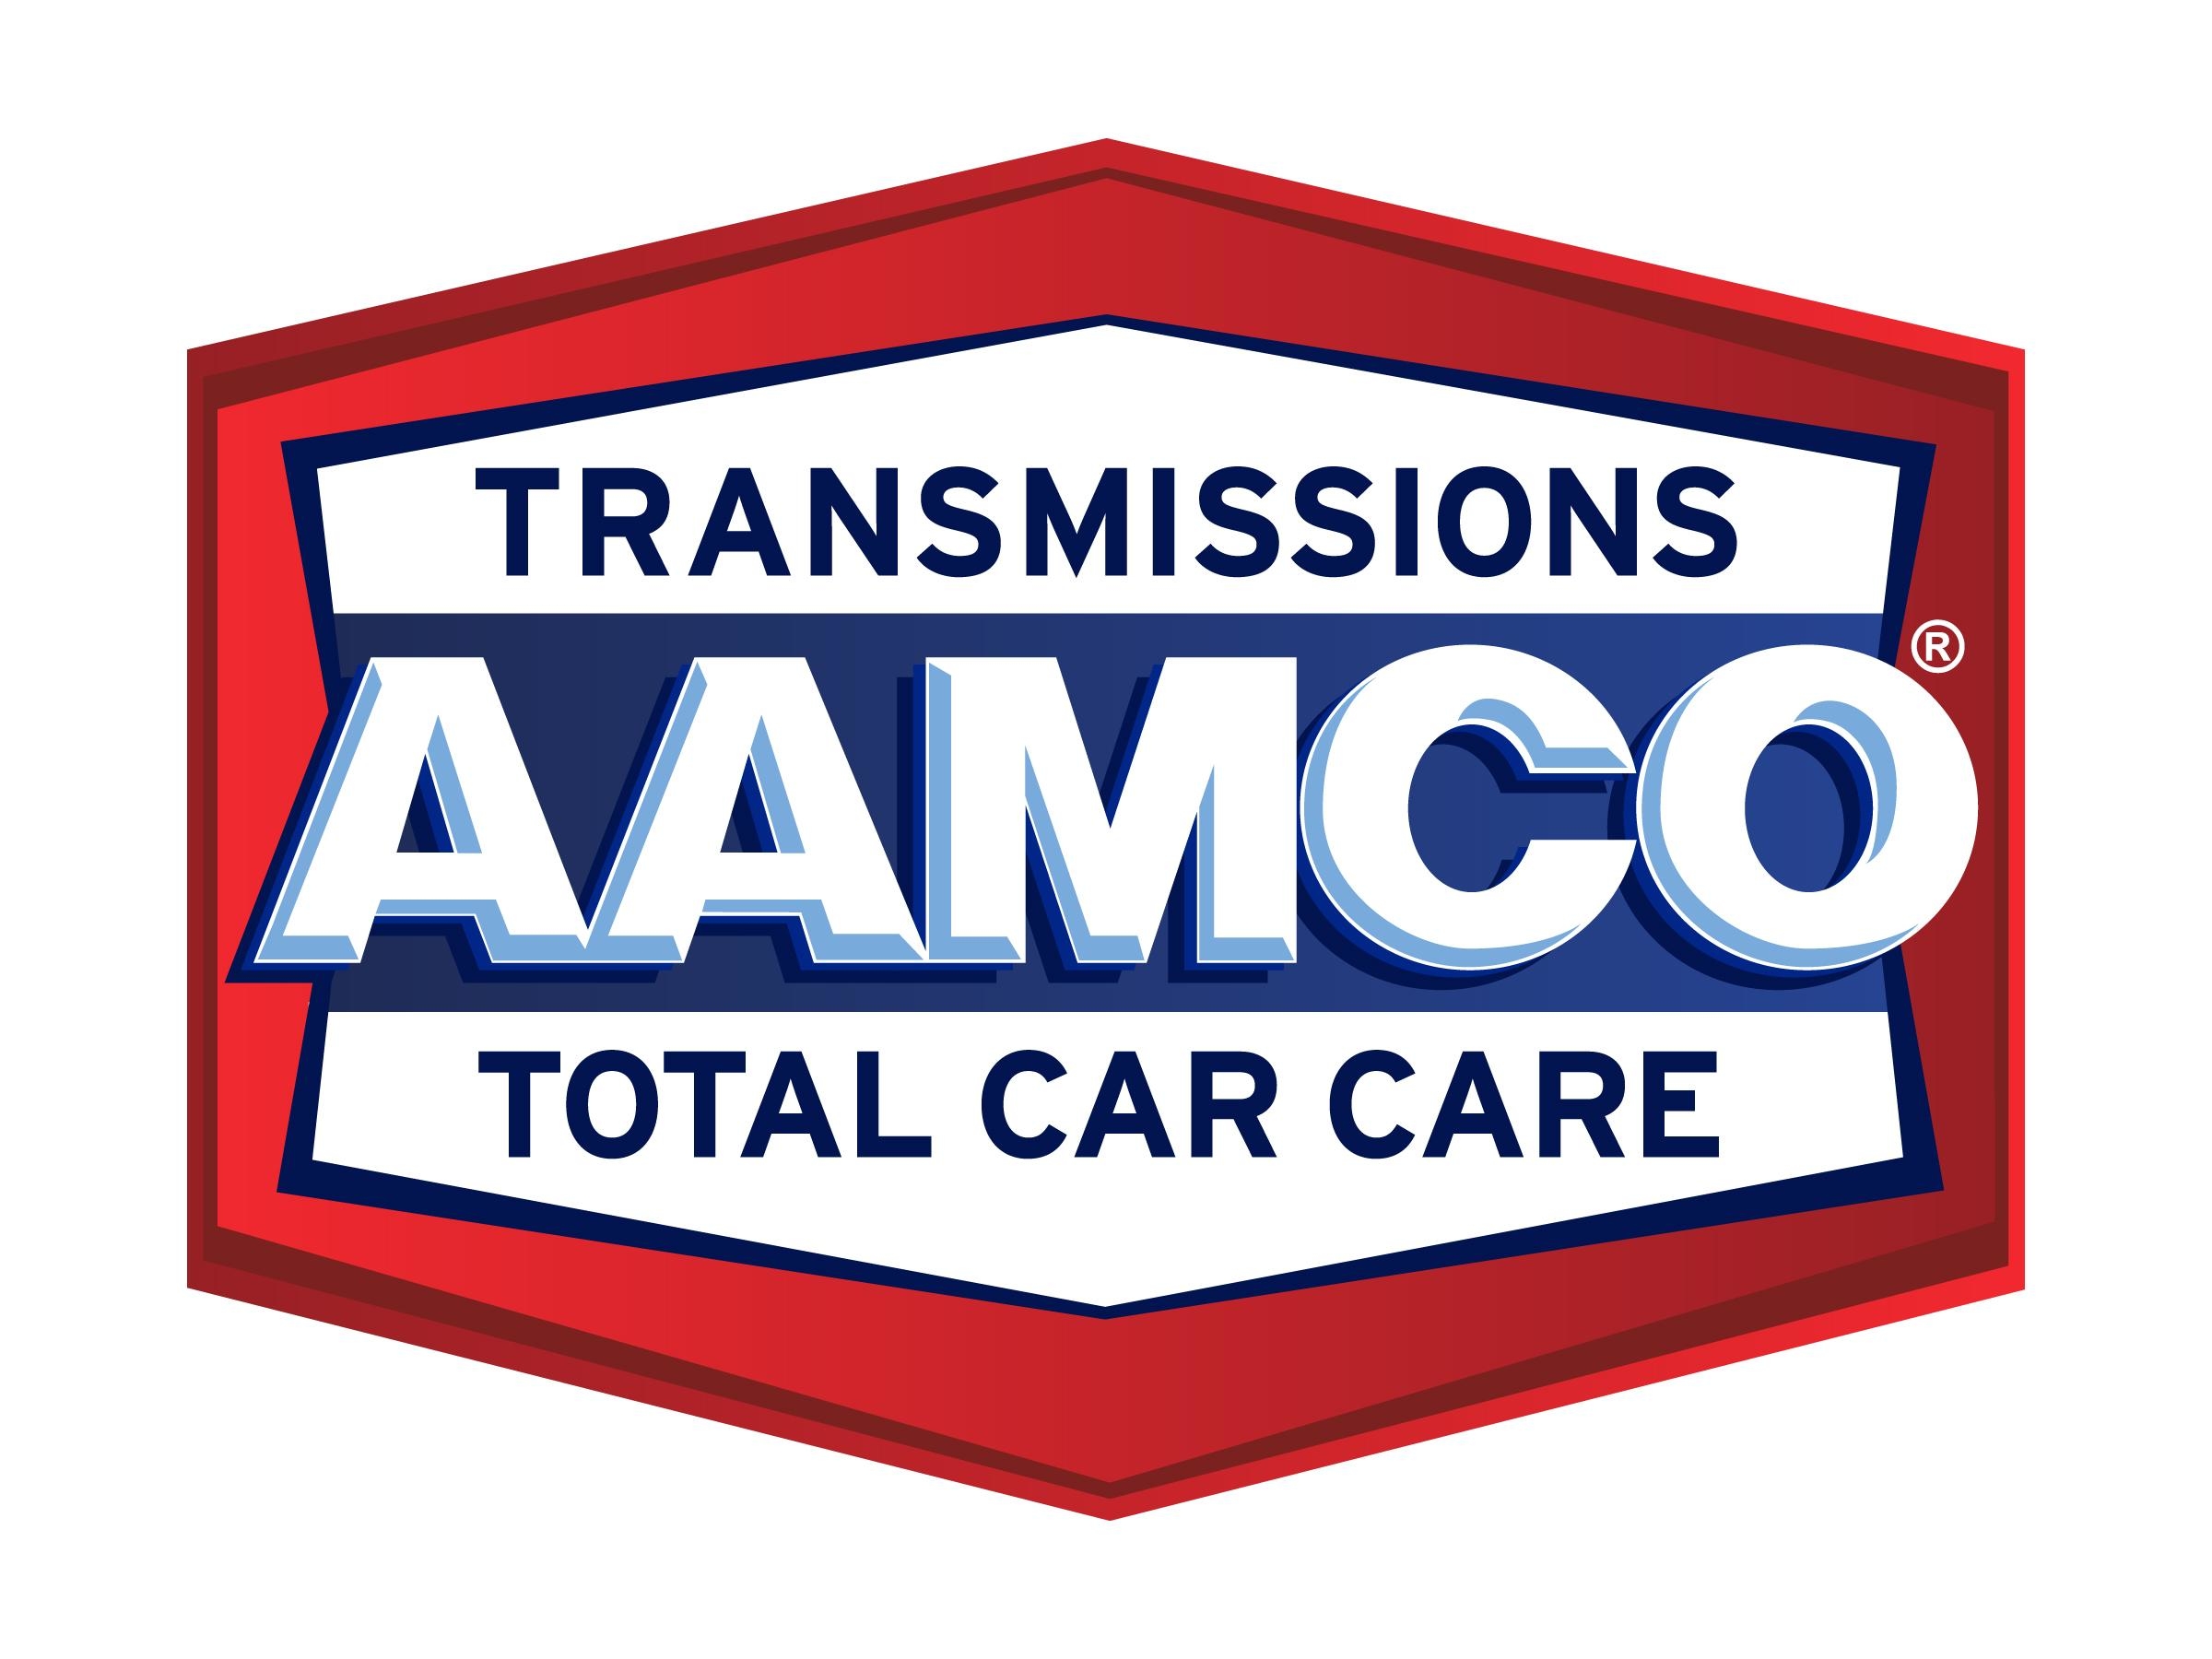 AAMCO Transmission and Total Car Care of Kansas City North